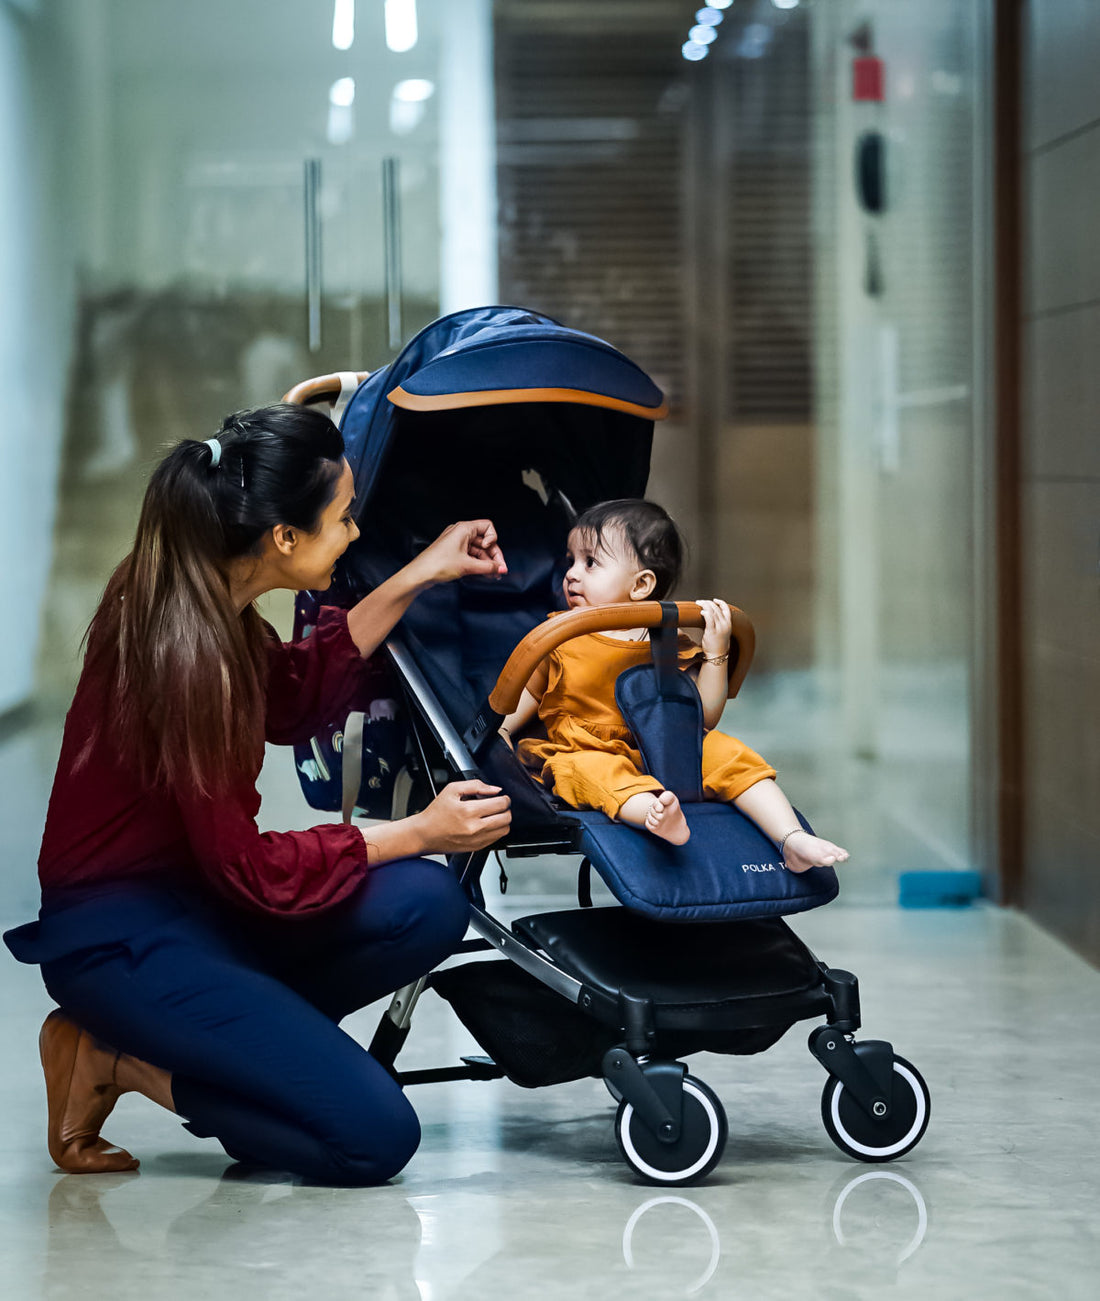 4 Things you should know about our Sturdy Stroller